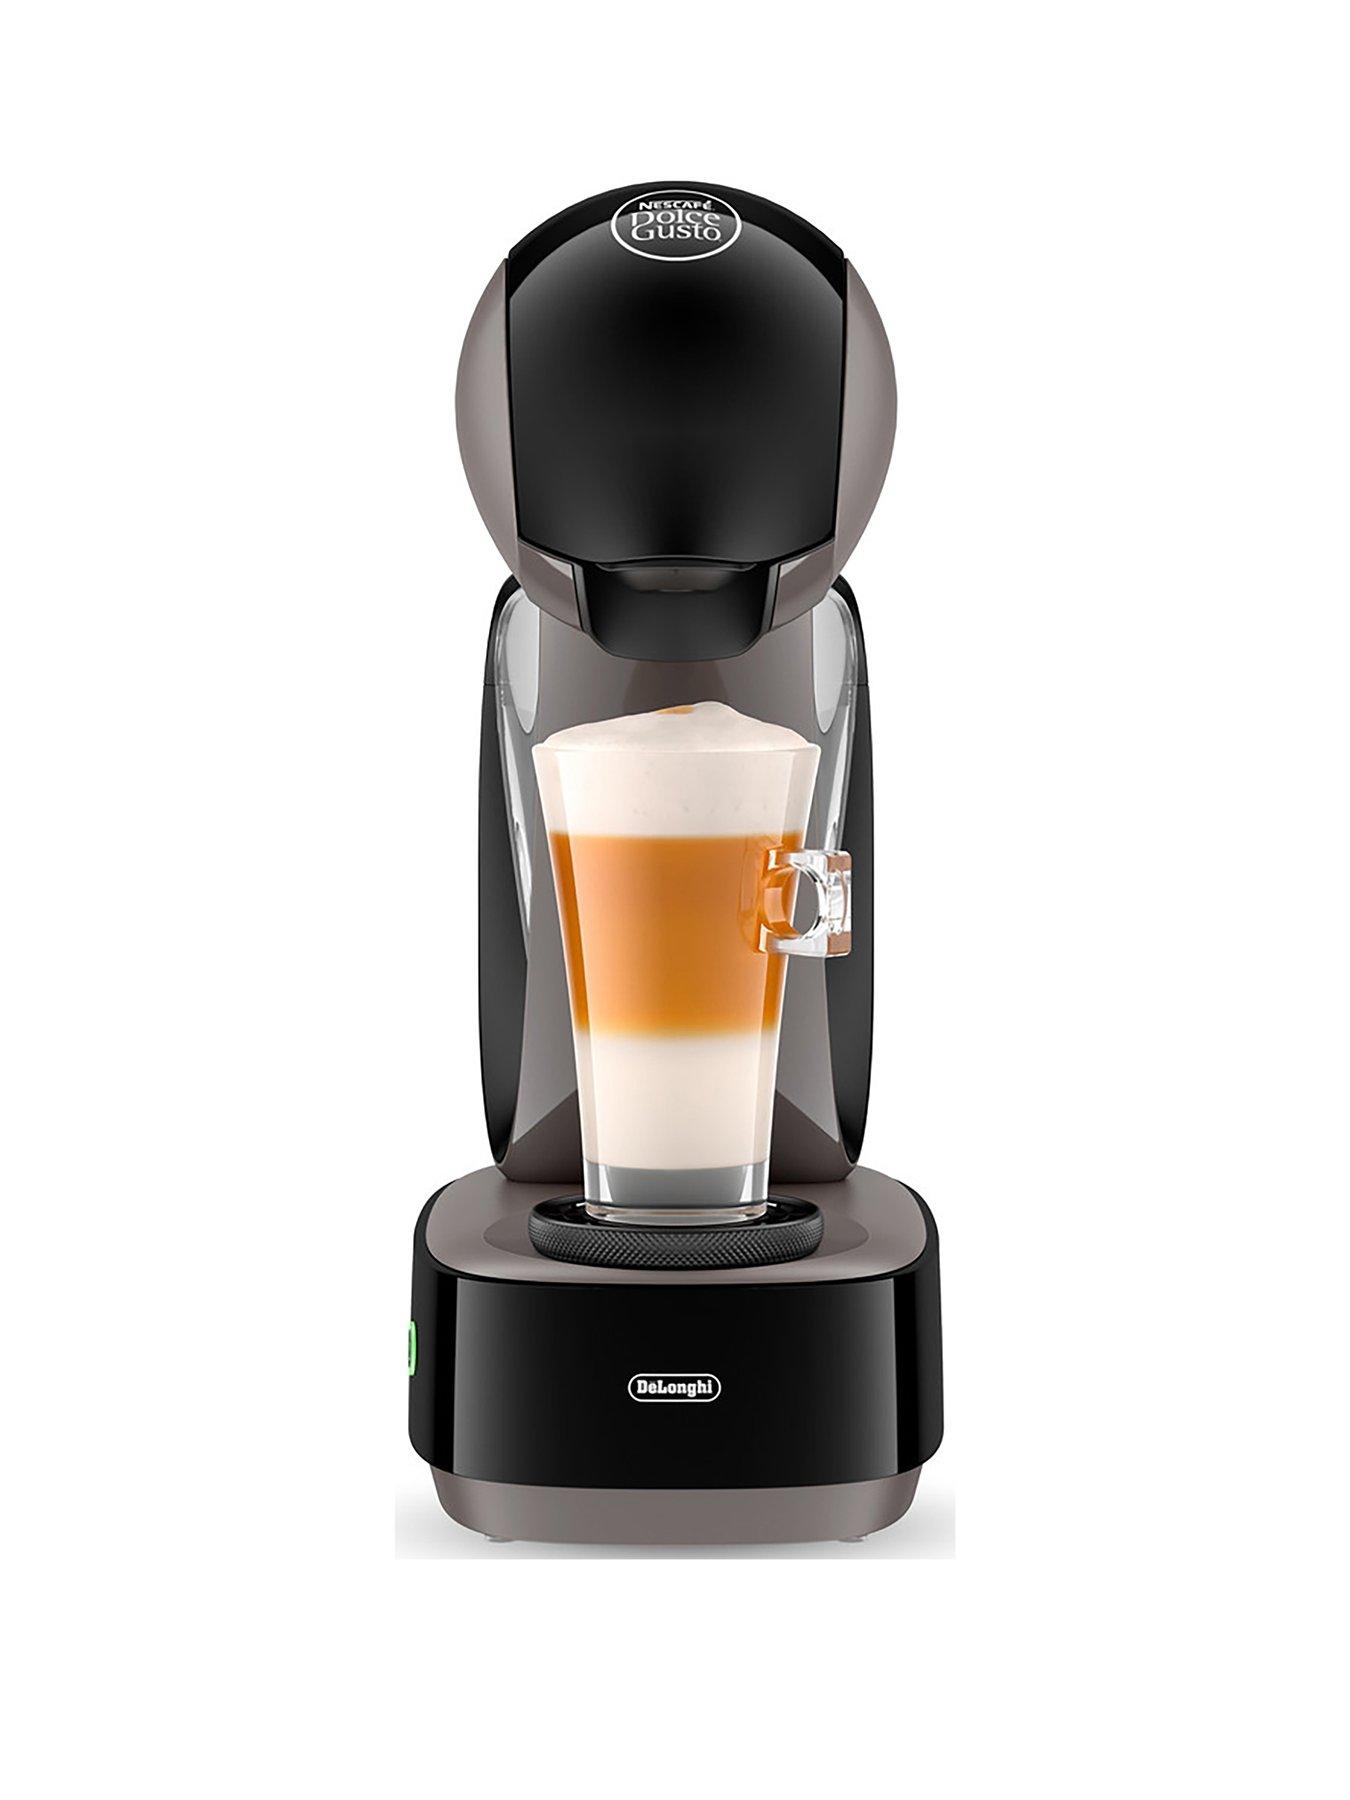 Dolce gusto infinissima. Krups Dolce gusto Infinissima KP 1701/1705/1708/kp173b. Капсульная кофемашина Dolce gusto Krups.